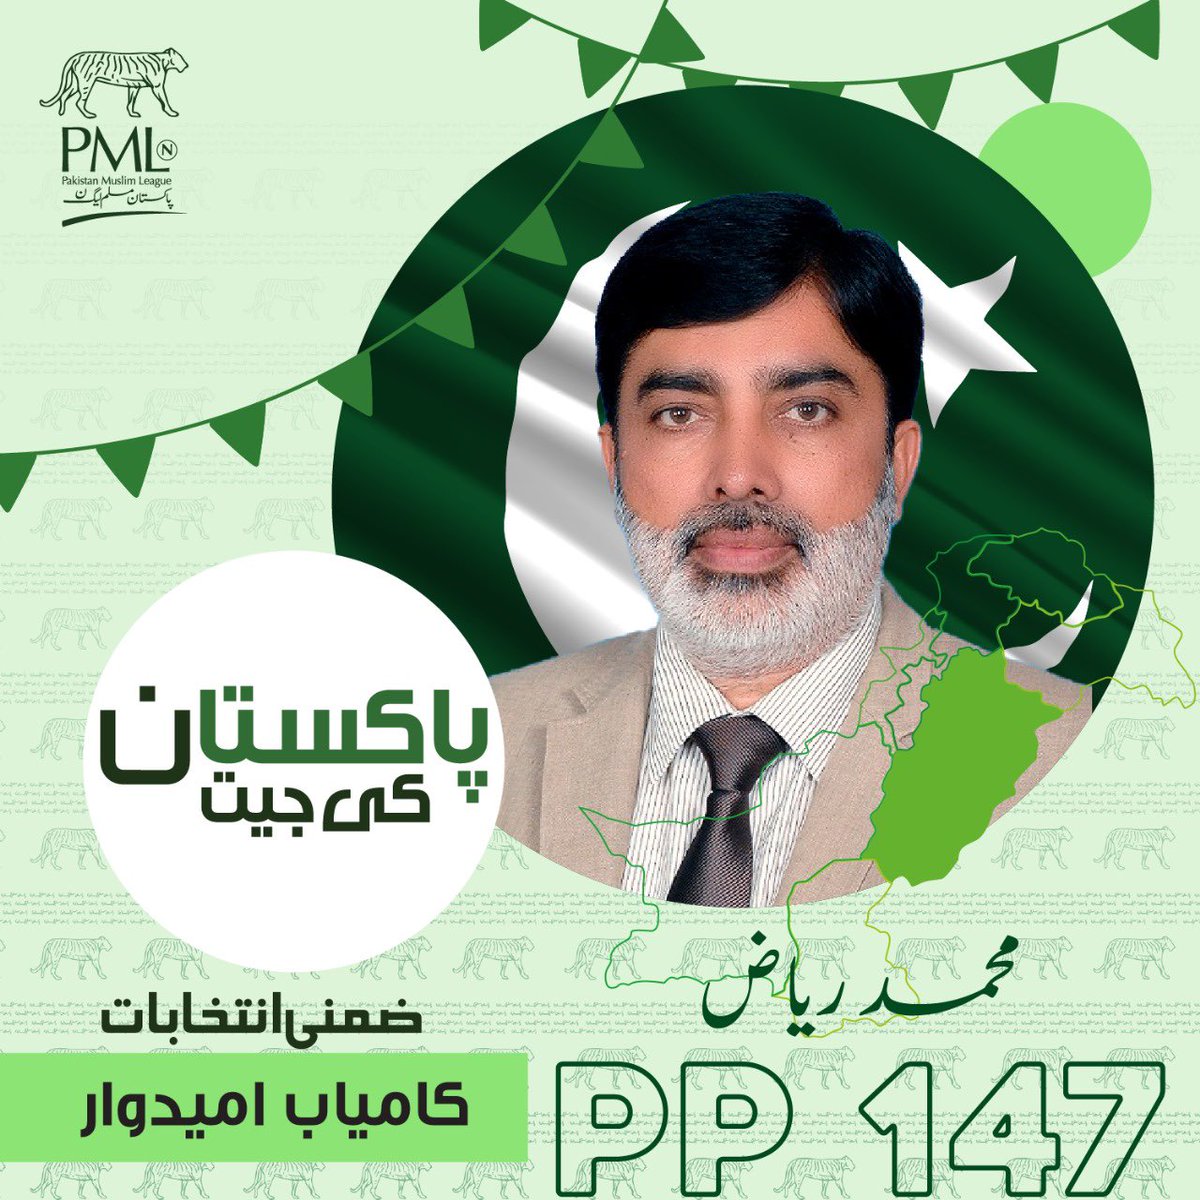 SHER roared in PP-36 & PP-147! Masses voted for performance.